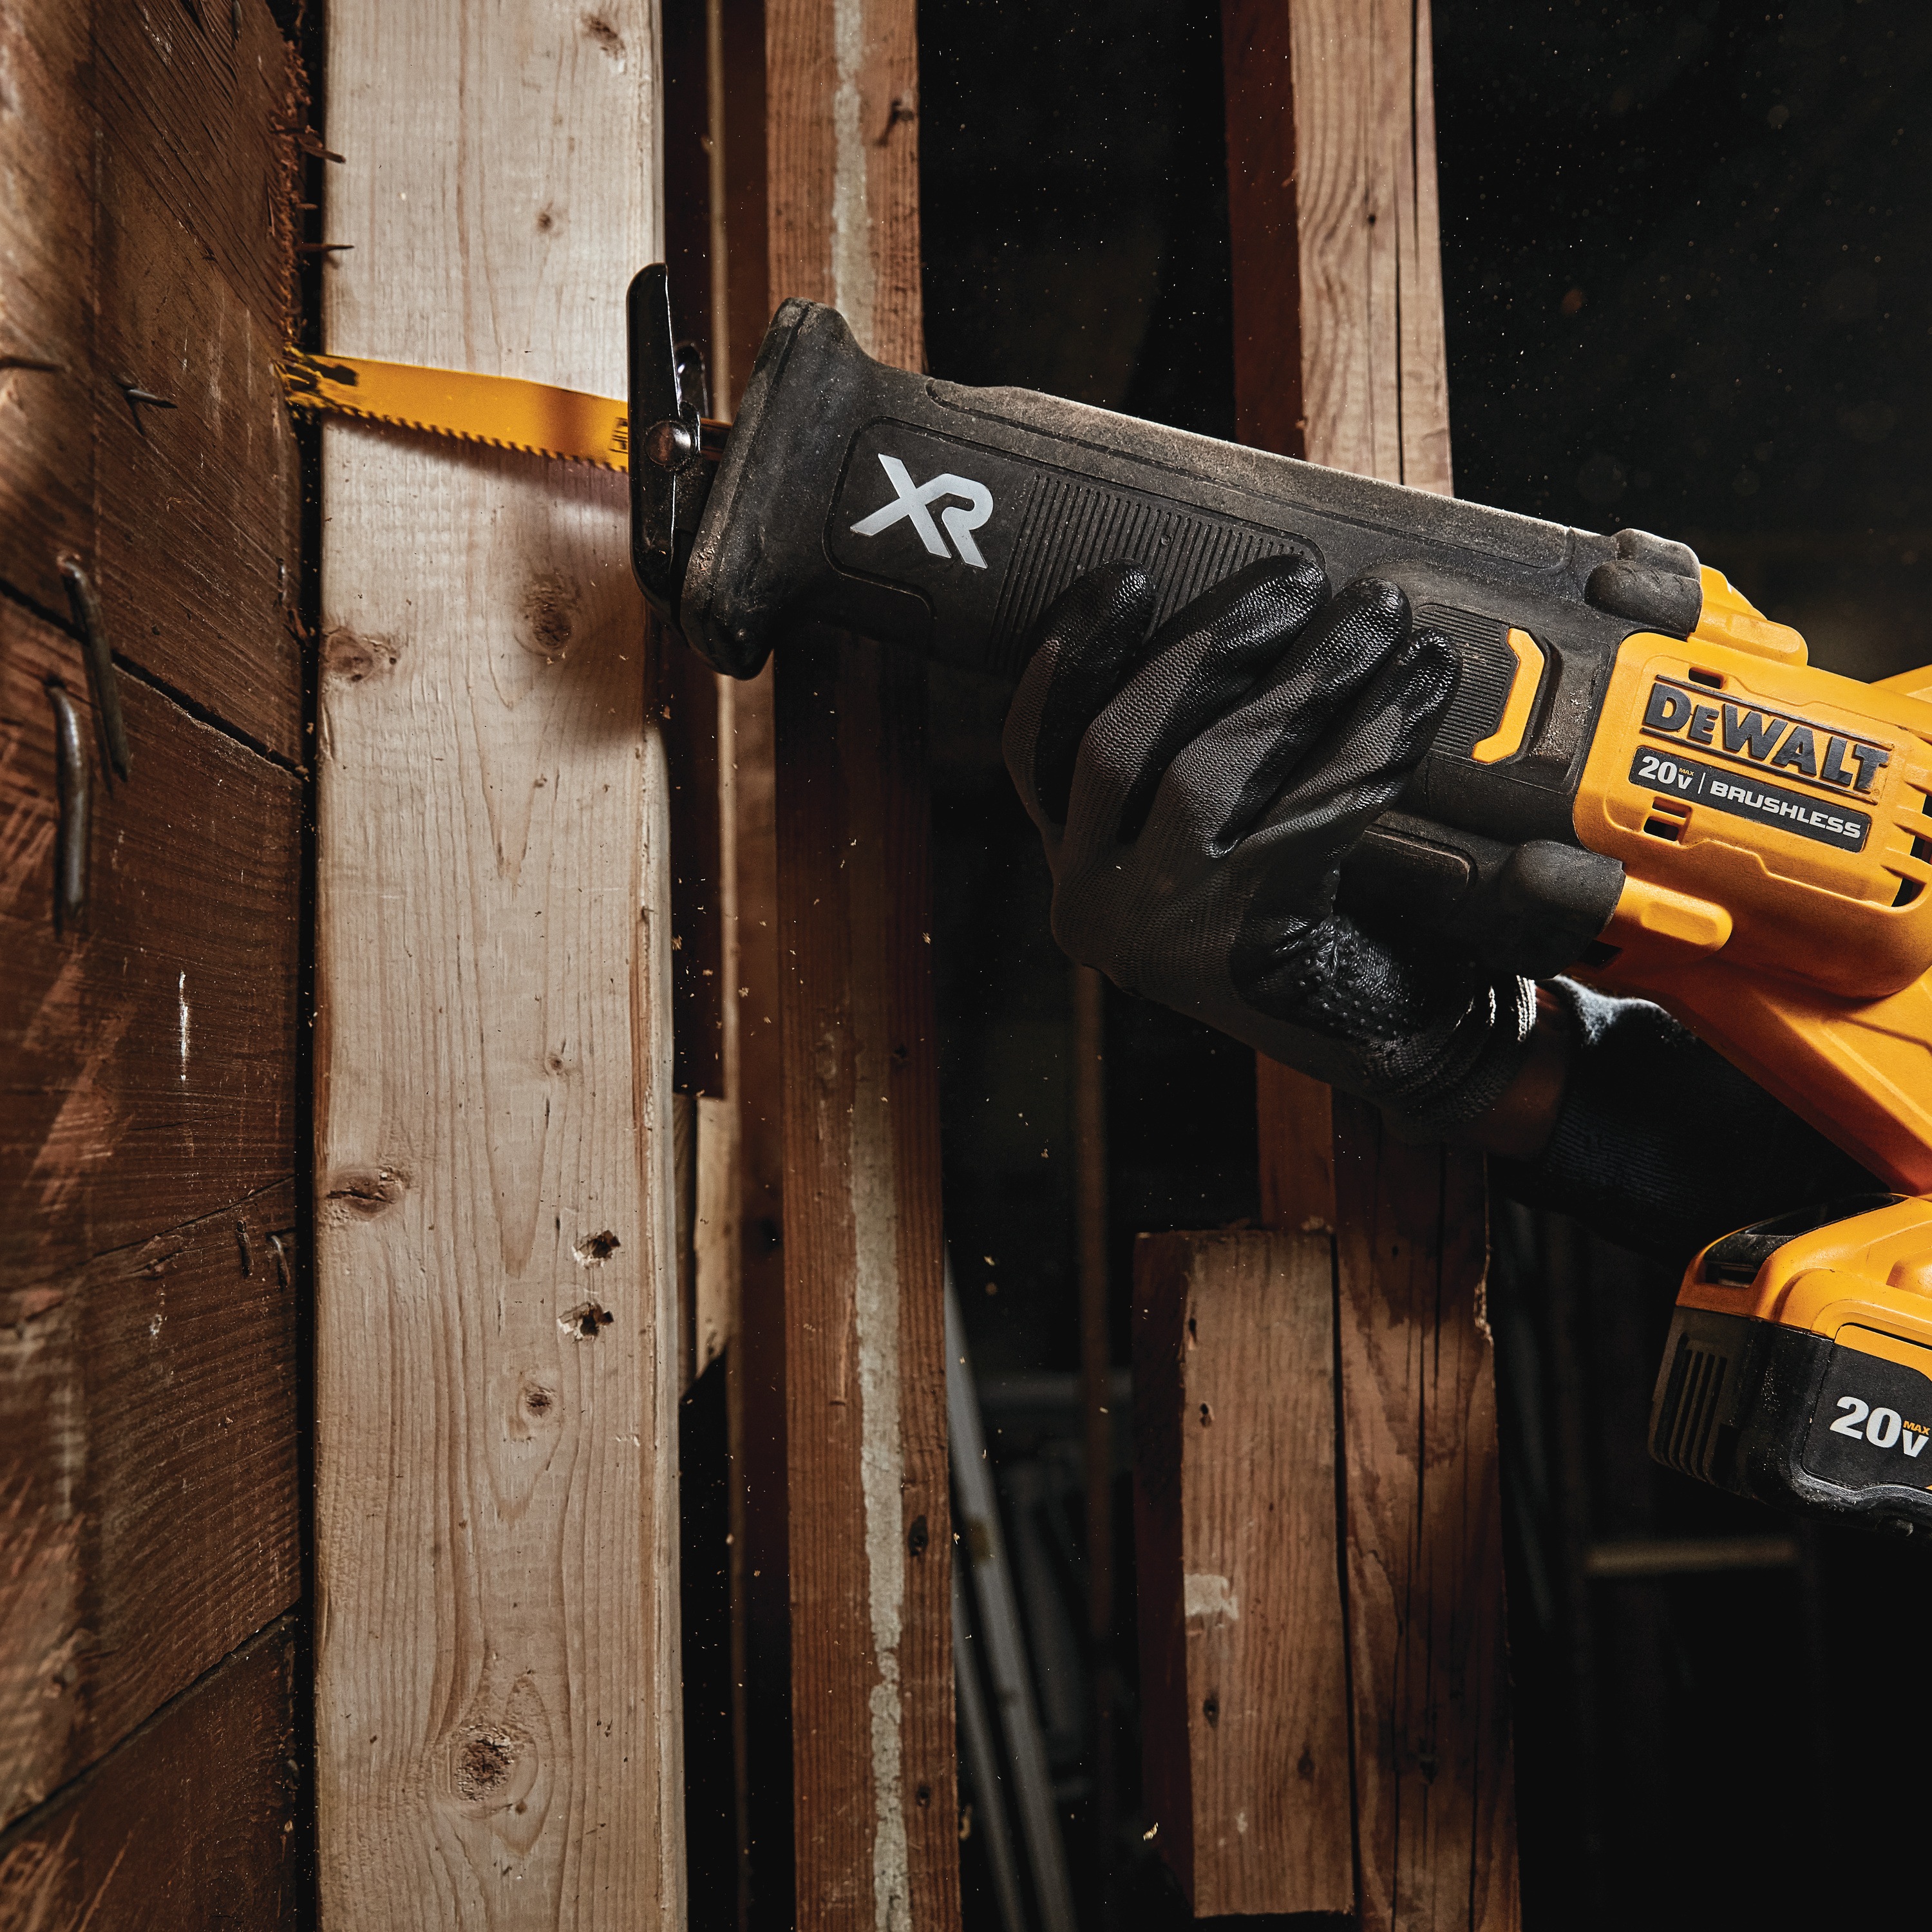 XR BRUSHLESS RECIPROCATING SAW WITH POWER DETECT being used by worker on shiplap